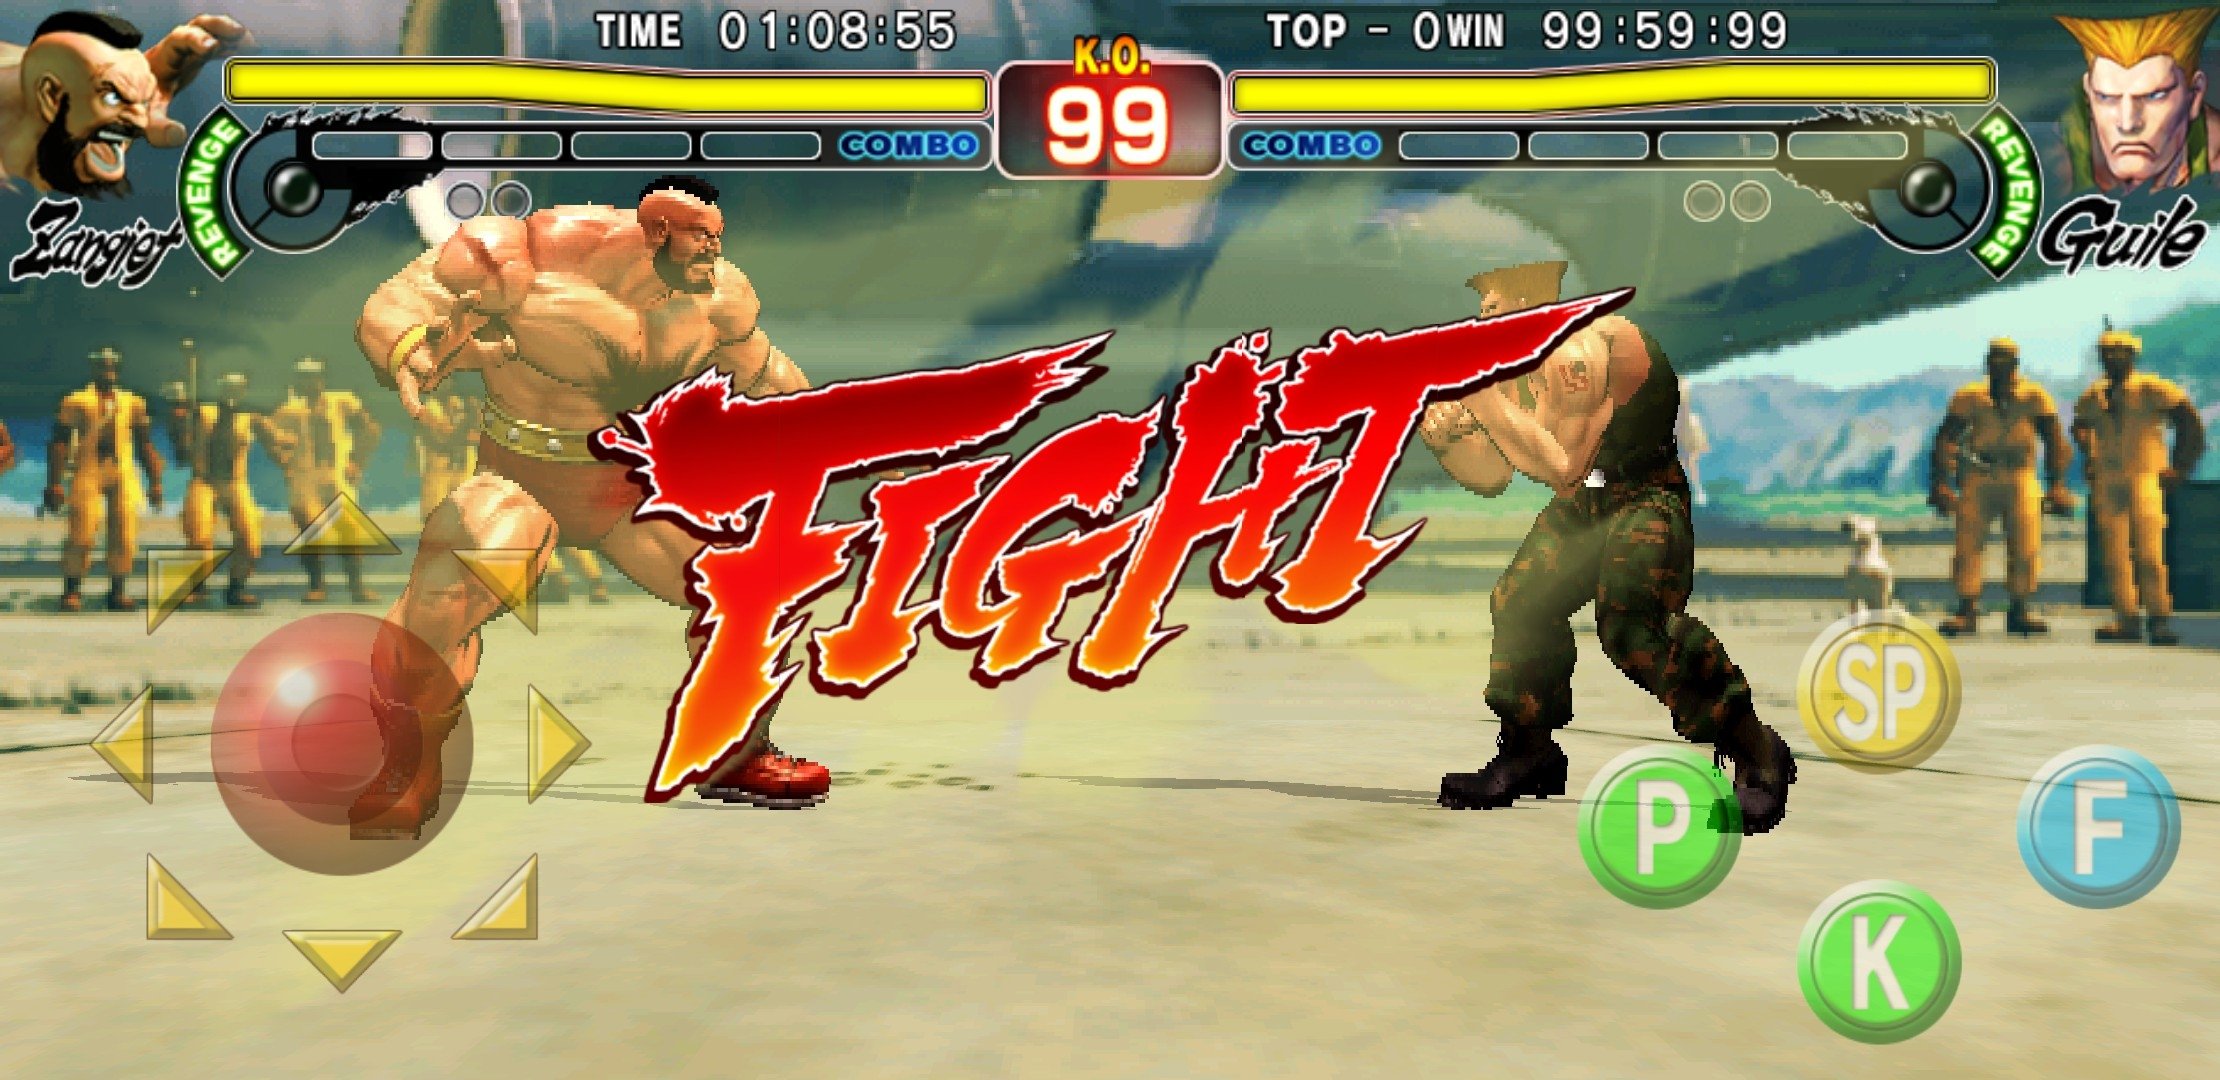 Game giveaway: Win Ultra Street Fighter 4